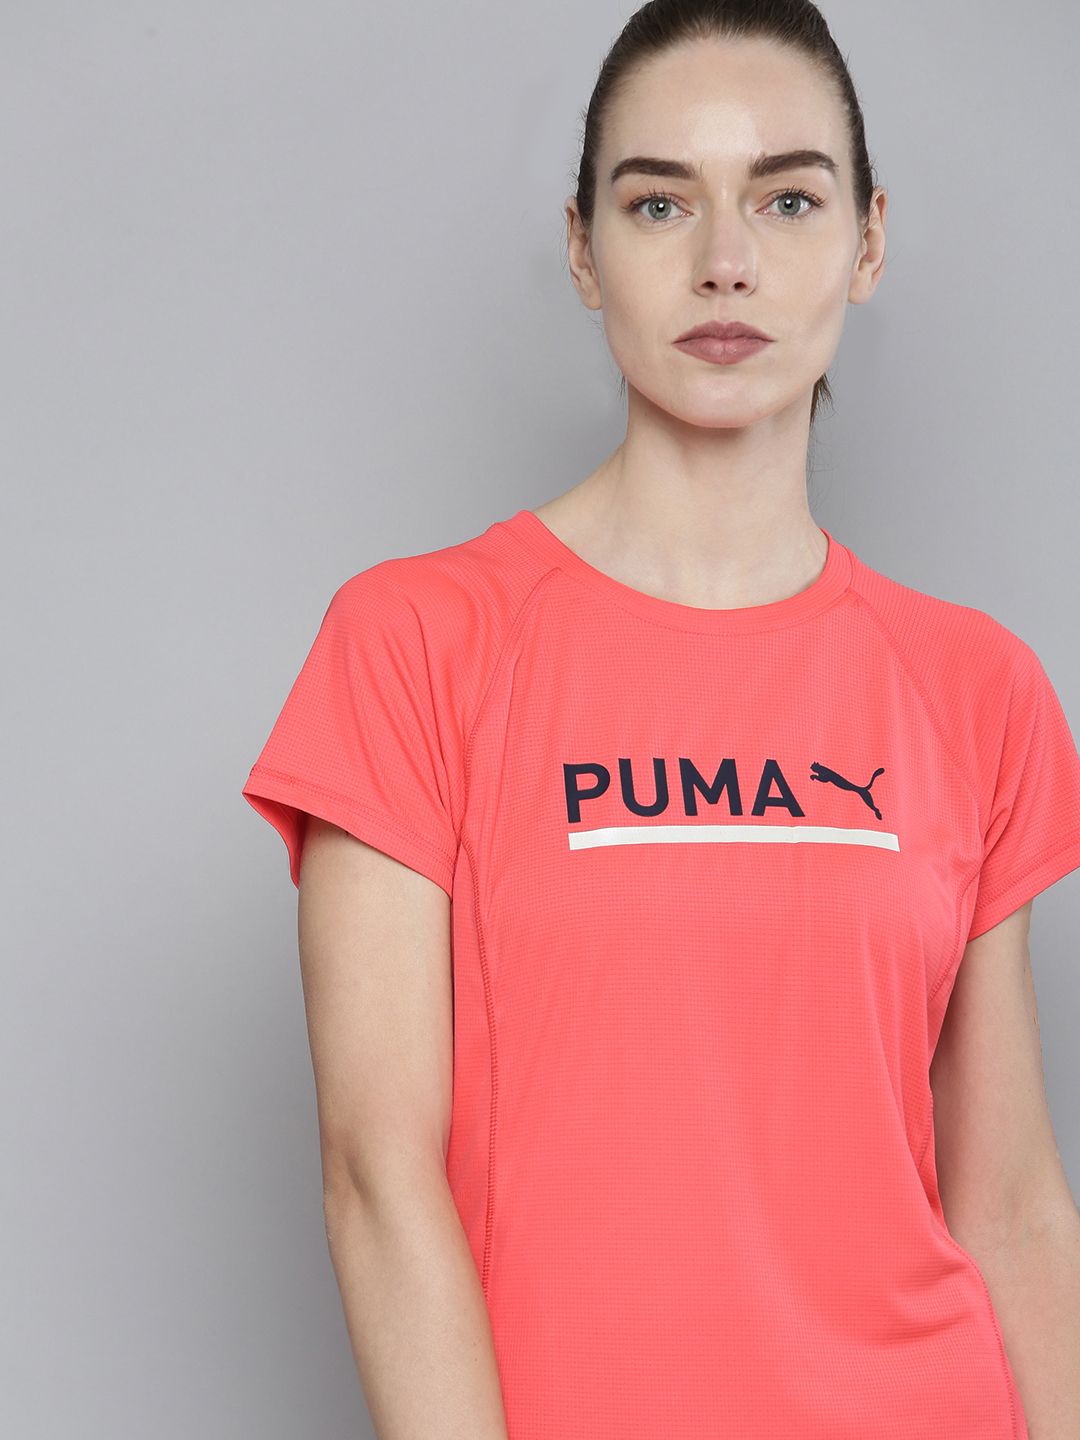 Puma Women Coral Pink RUN Logo Printed dryCELL Slim Fit Running T-shirt Price in India